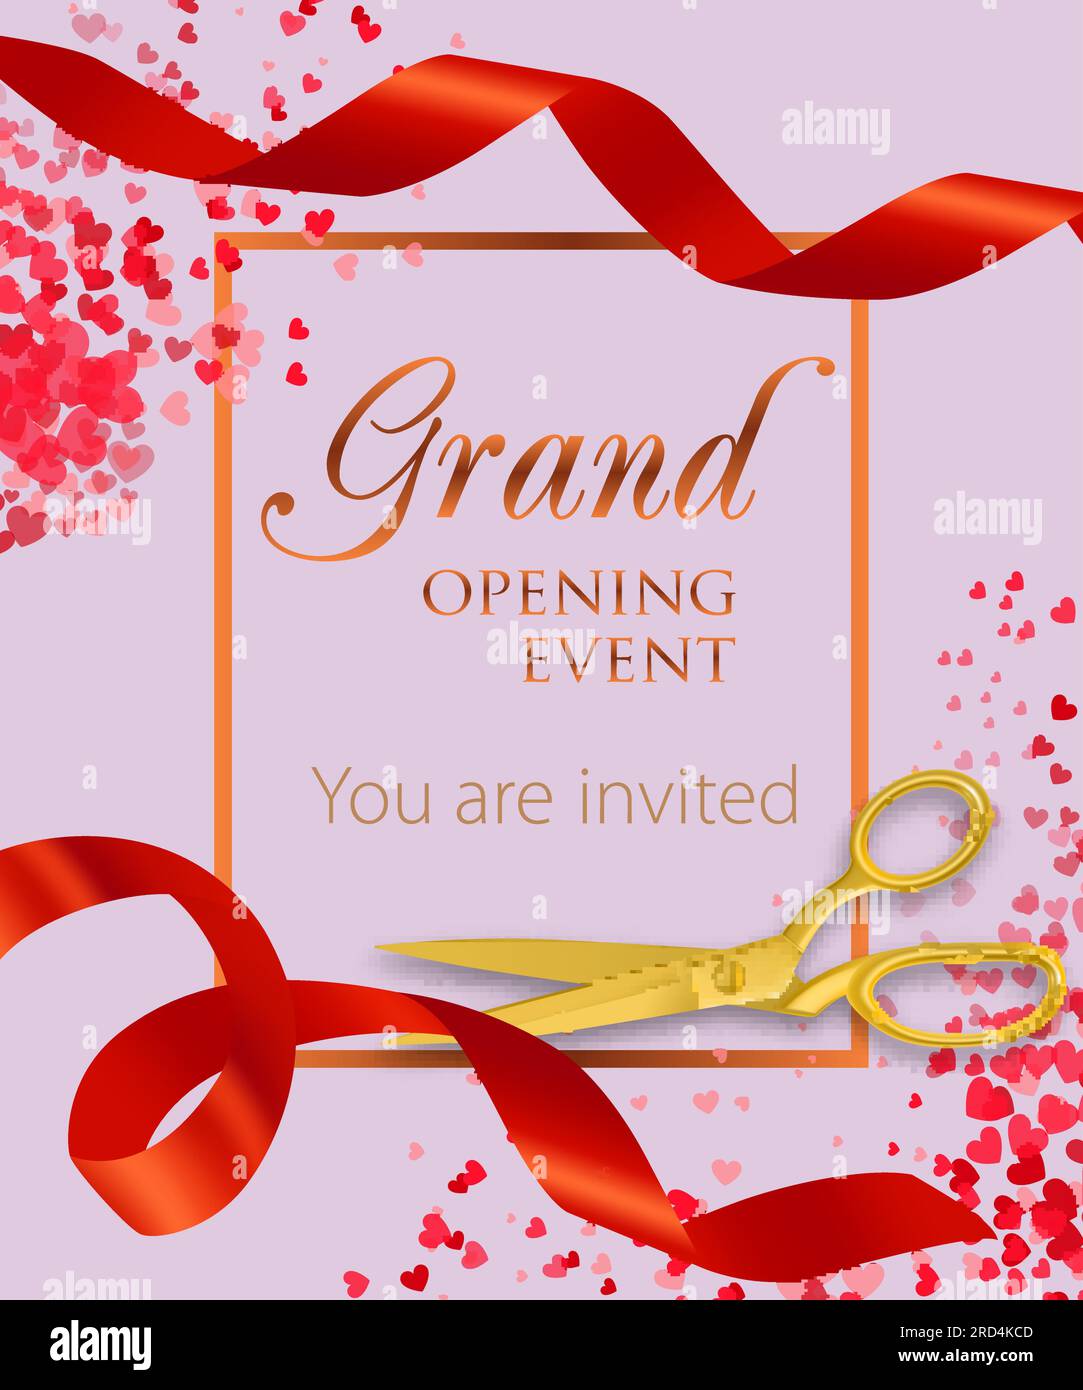 Free Vector, Grand opening you are invited lettering